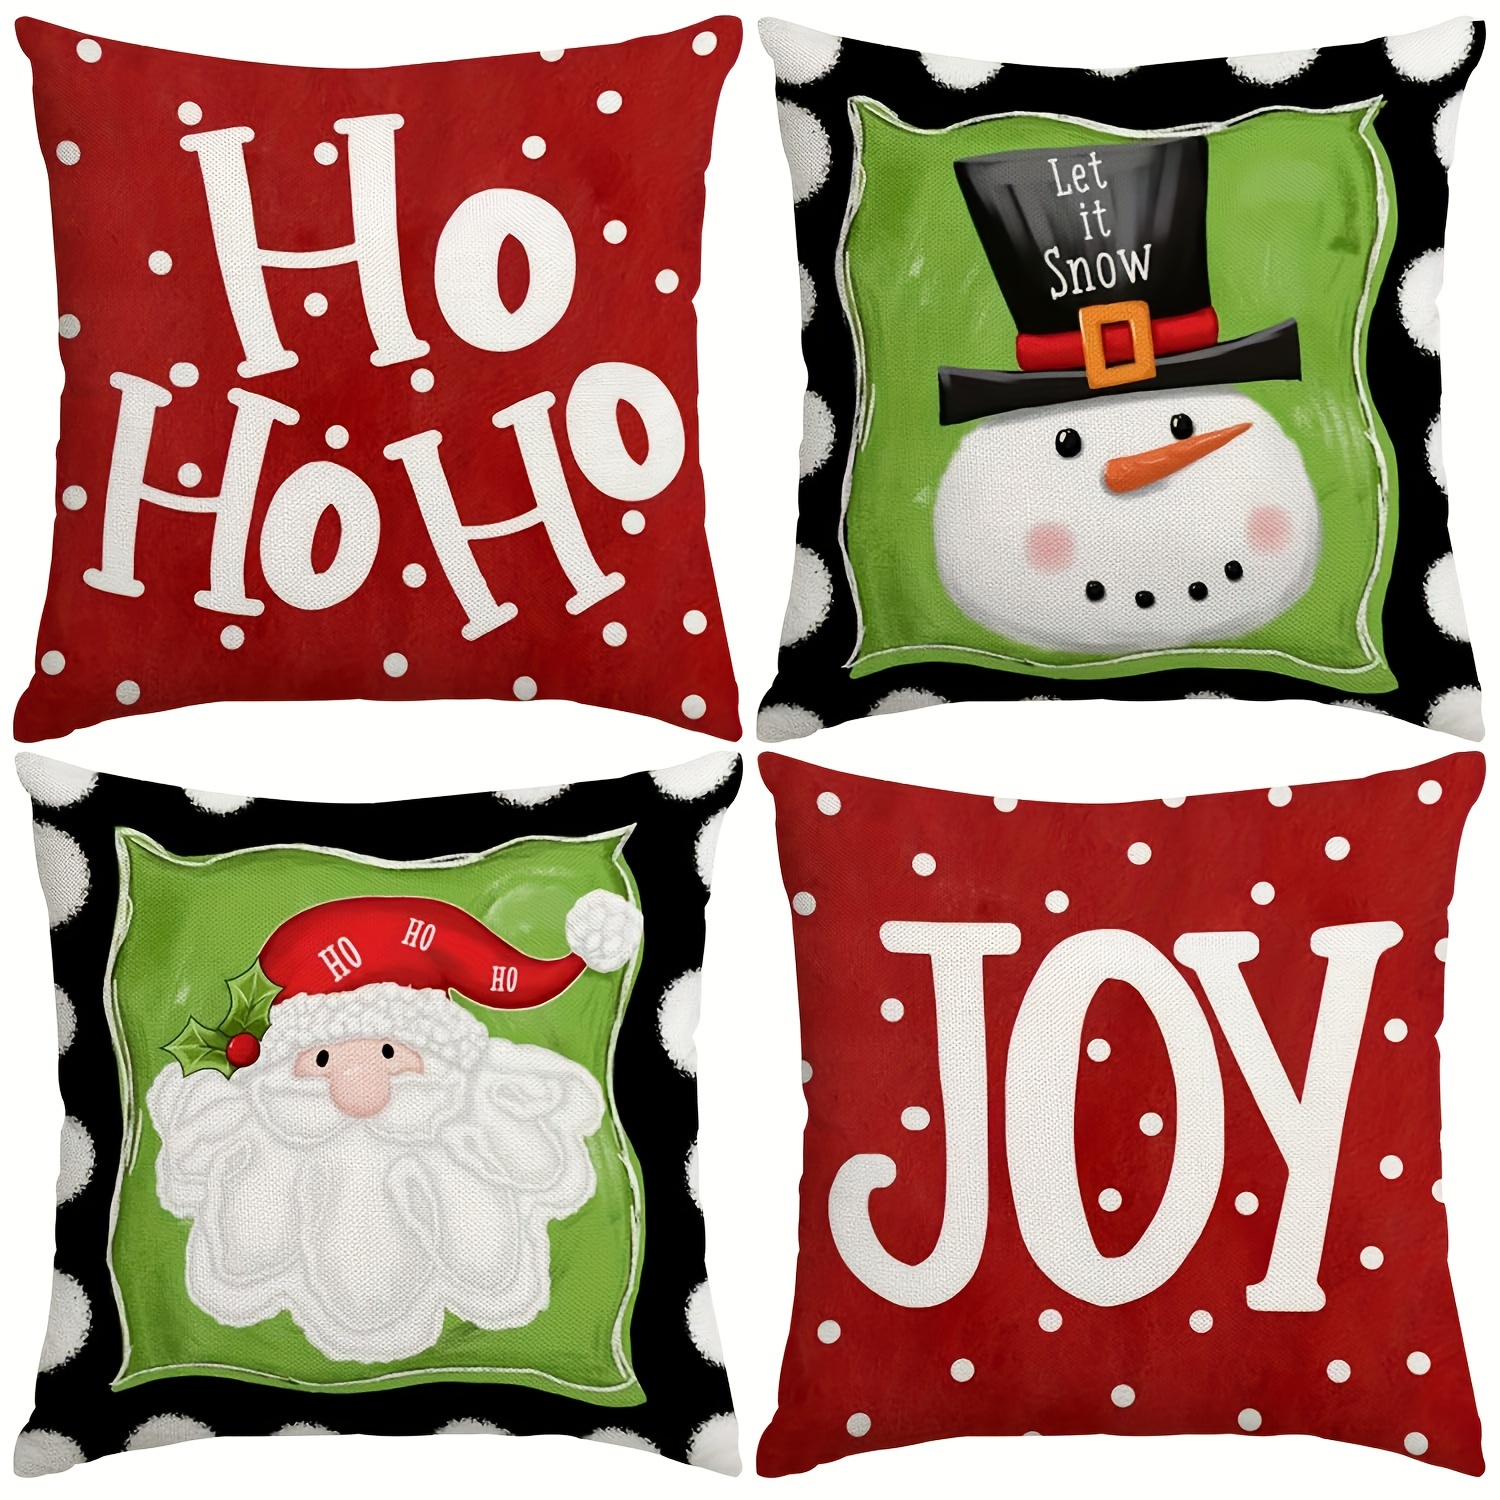 

4pcs Linen Mixed Weave Santa Claus Snowman Hohoho Joy Throw Pillow Cover Home Decor, Room Decor, Bedroom Decor, Collectible Buildings Accessories (cushion Is Not Included)